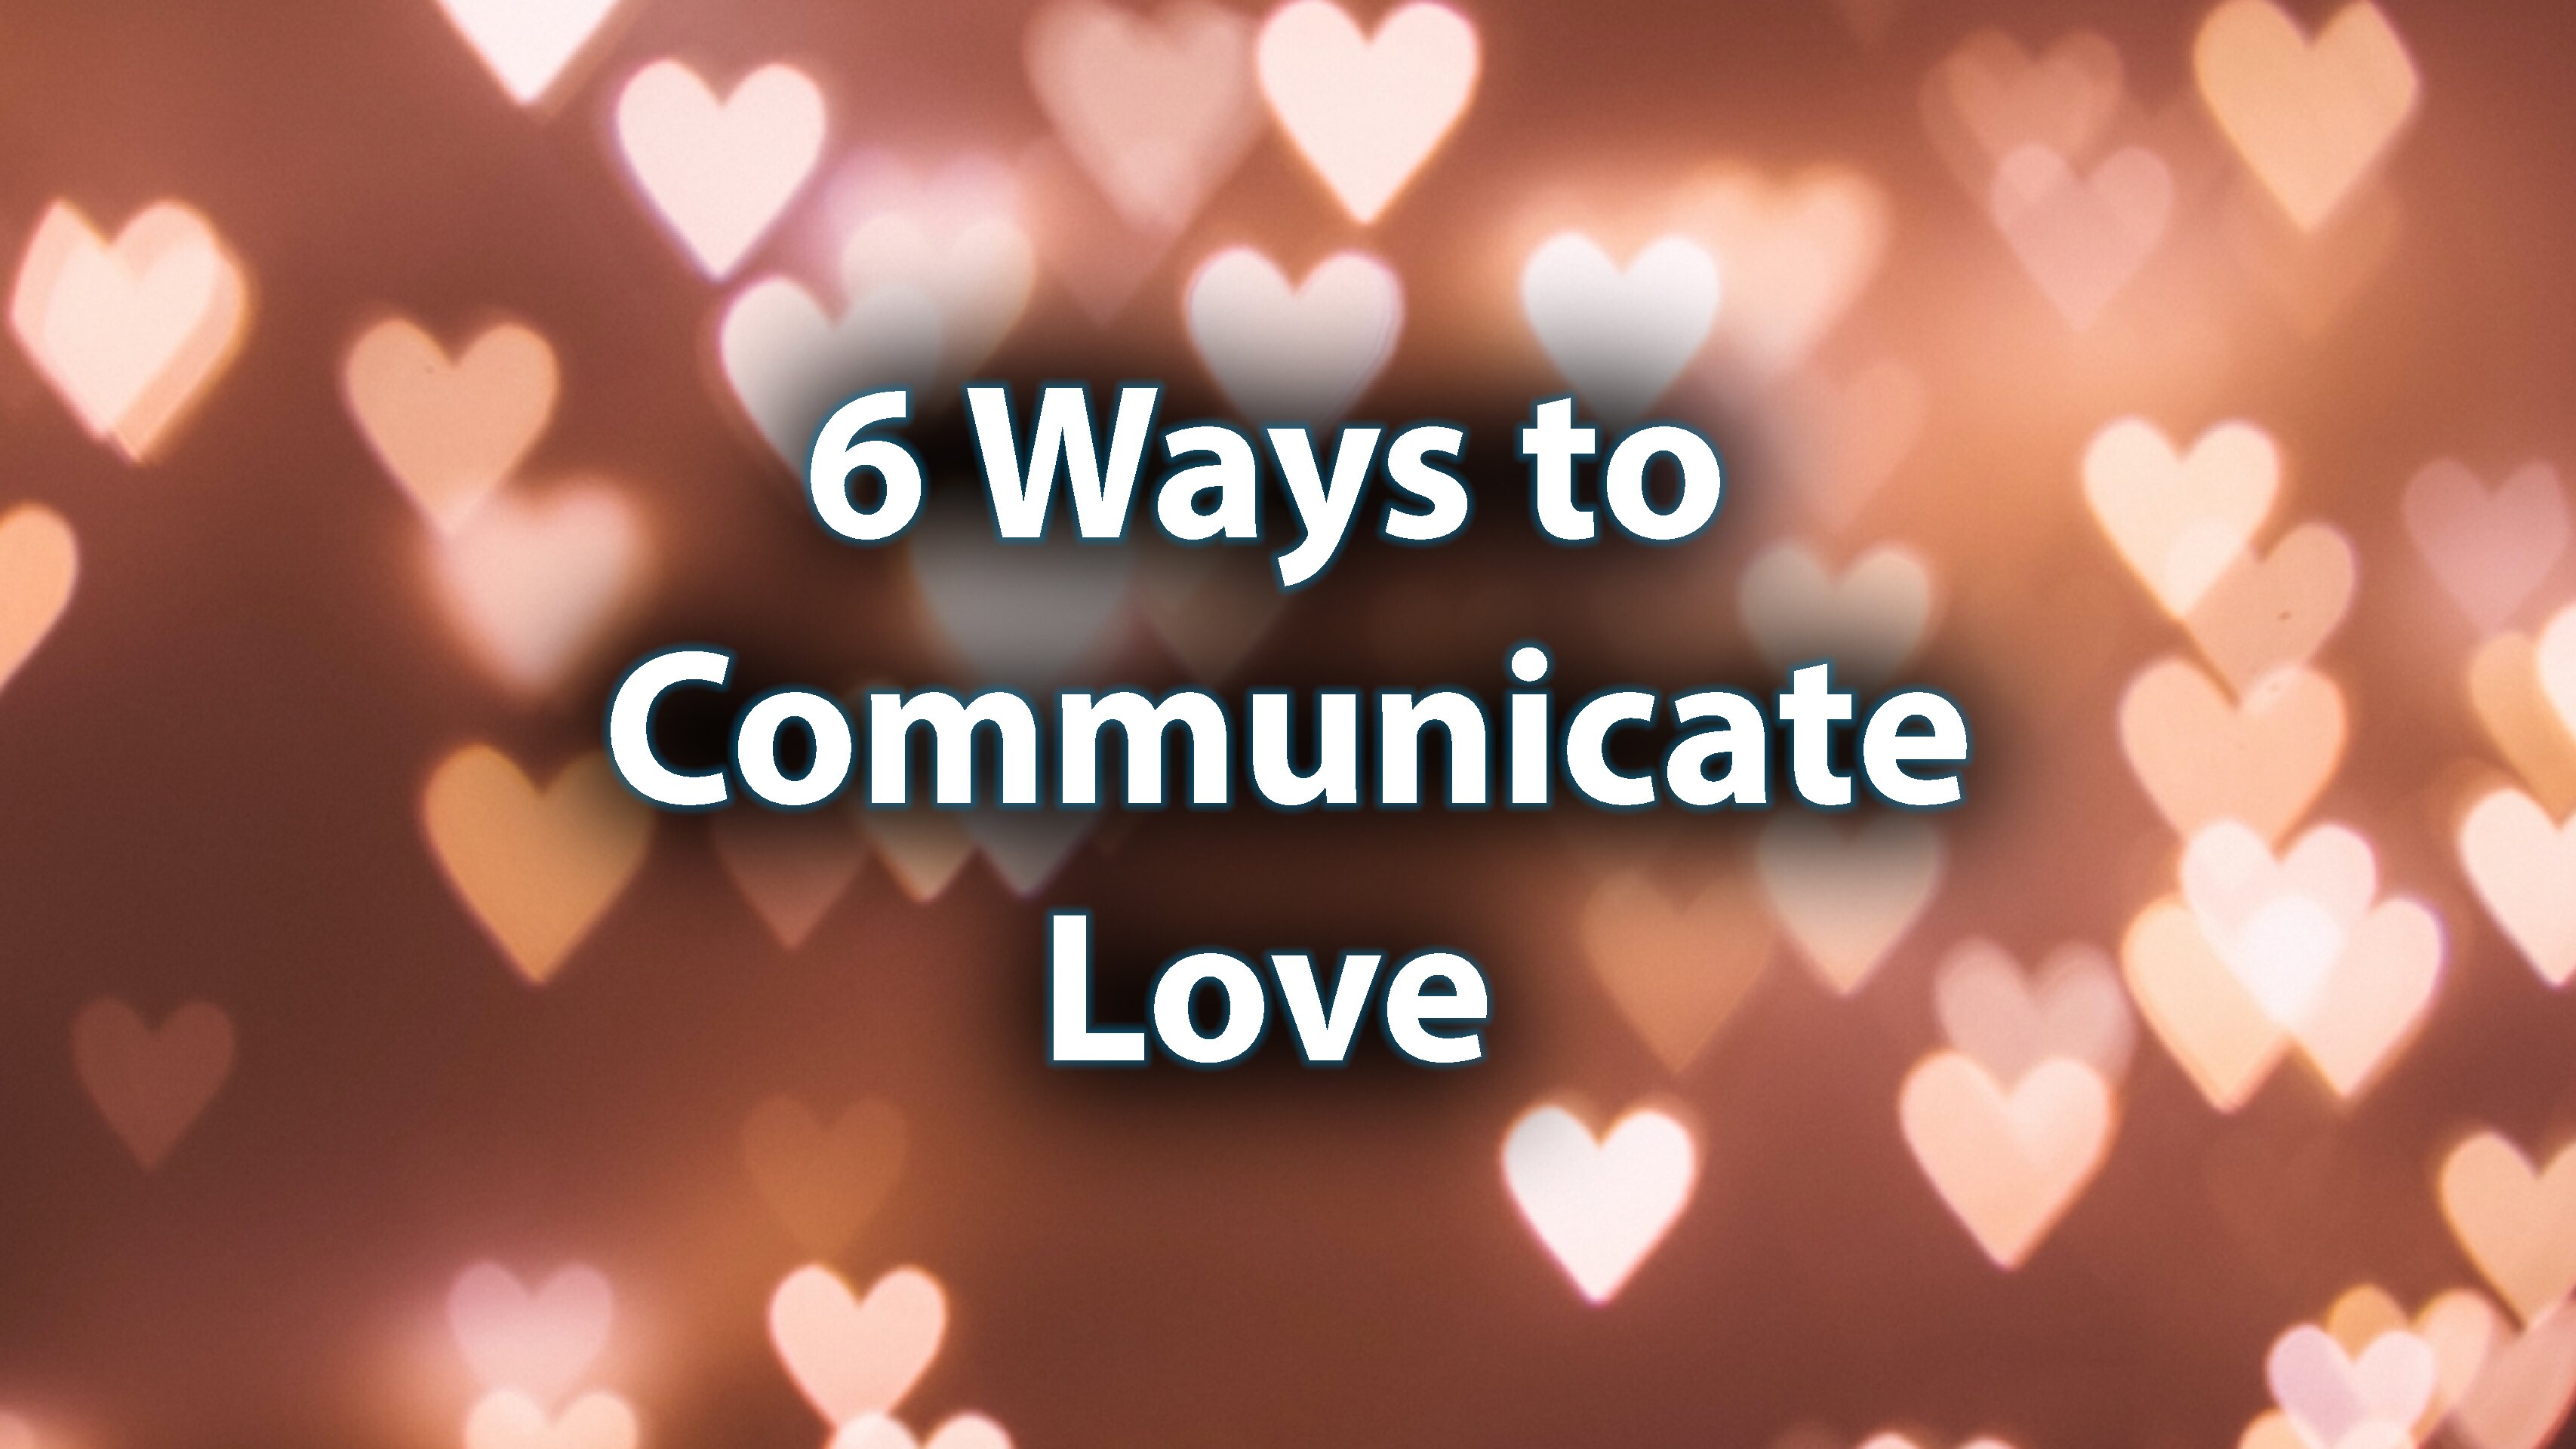 Day 13: 6 Ways to Communicate Love